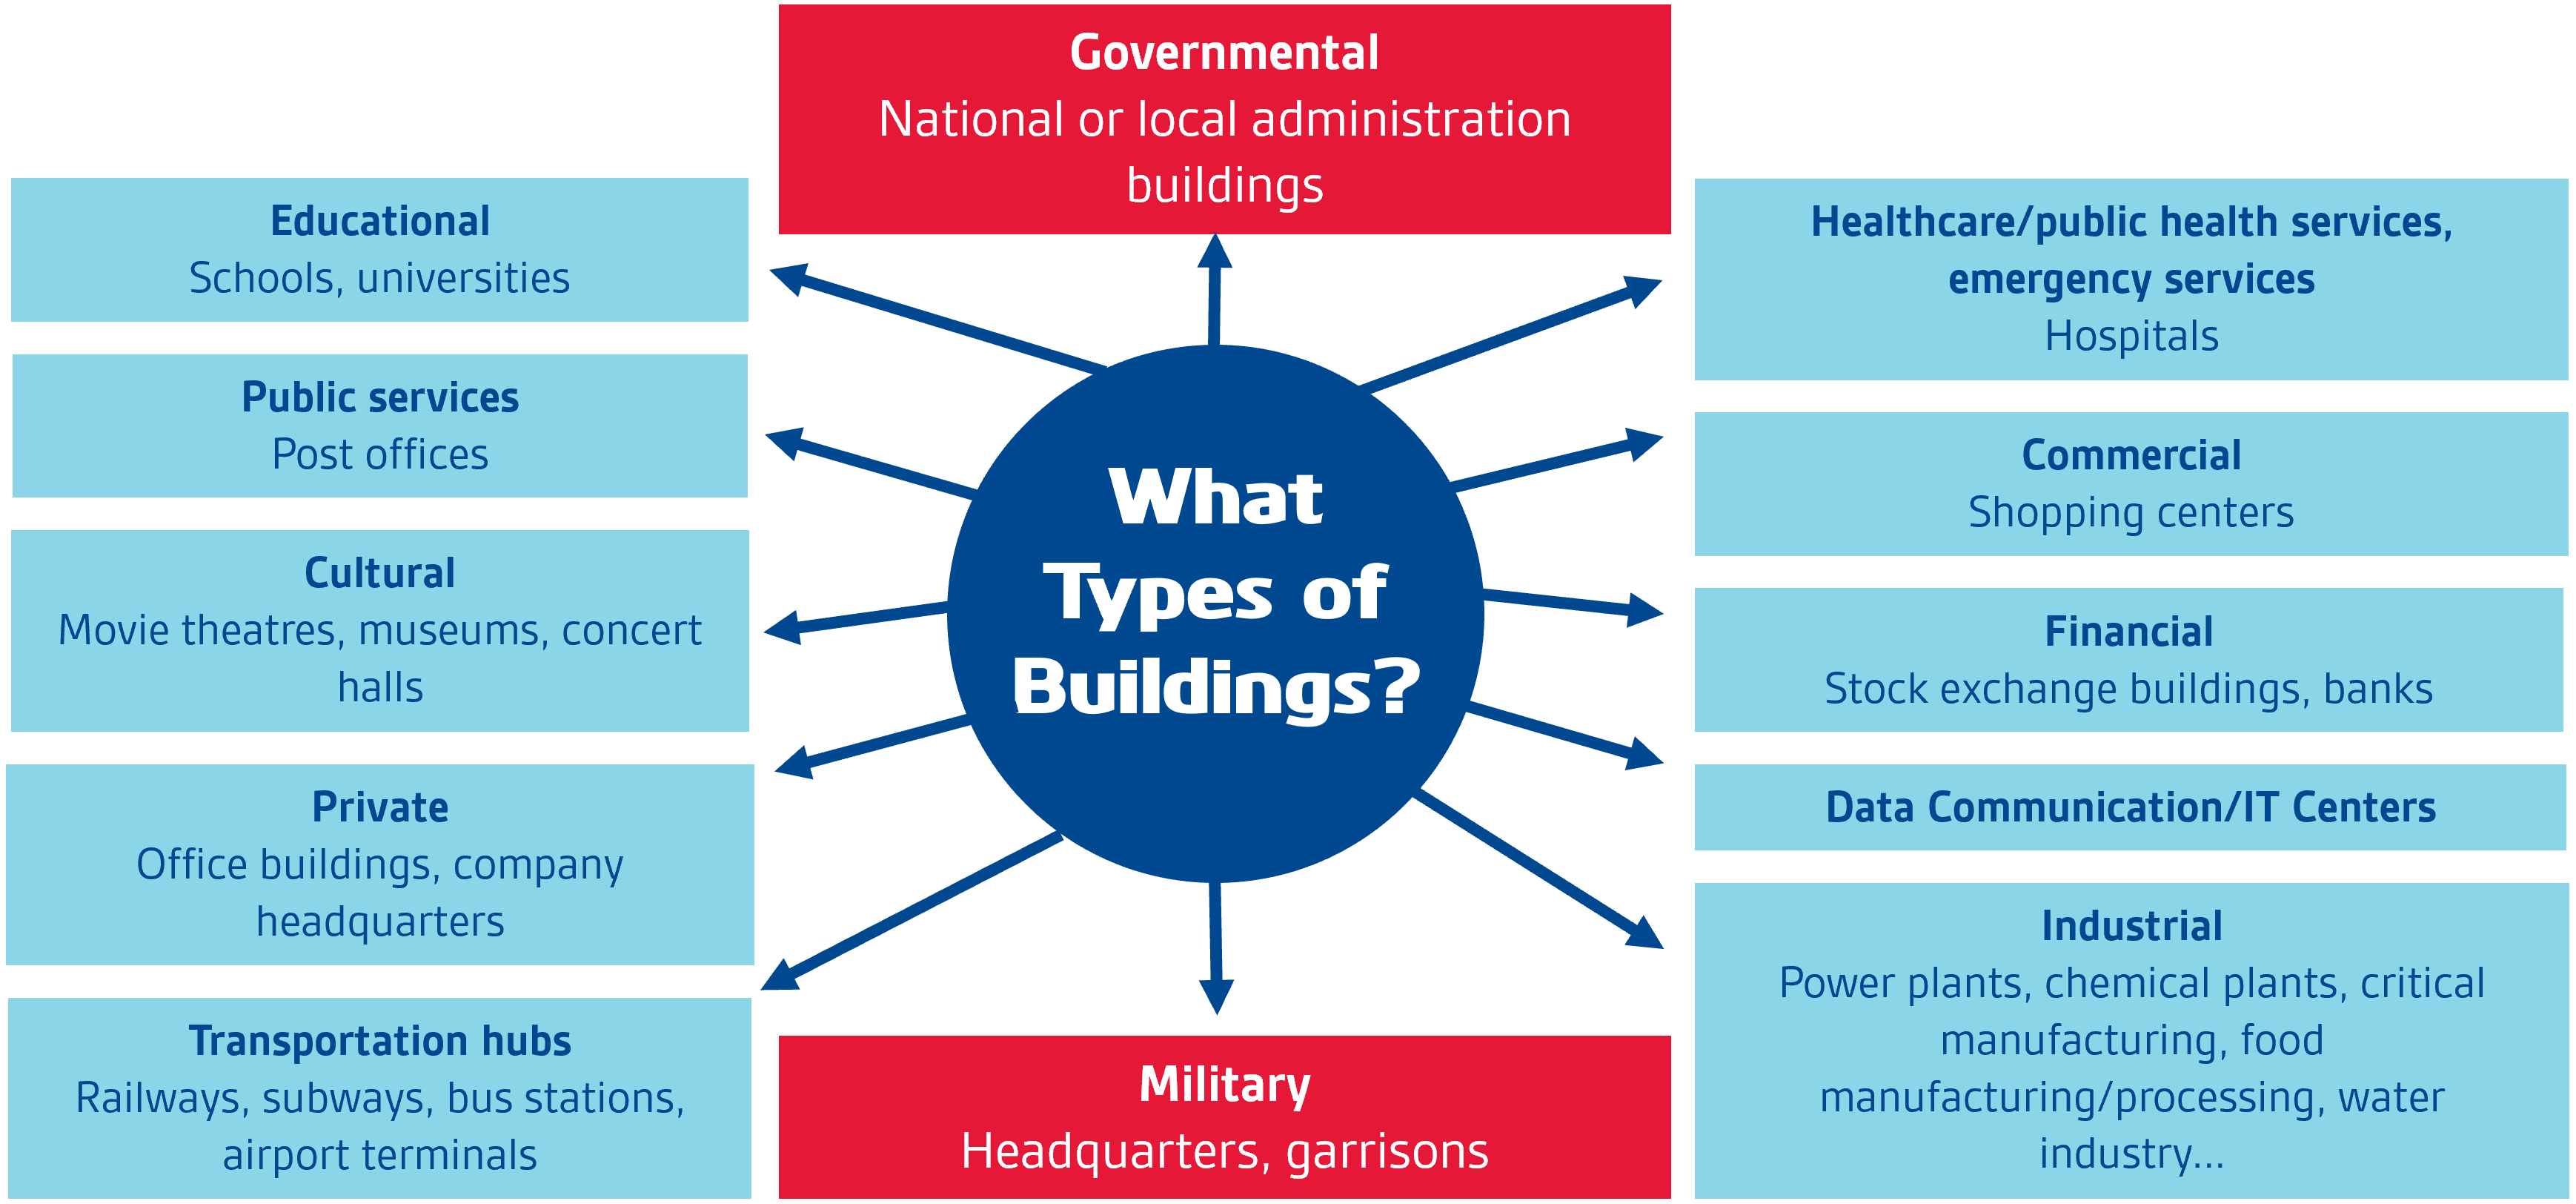 what types of buildings are vulnerable to cbrn threats